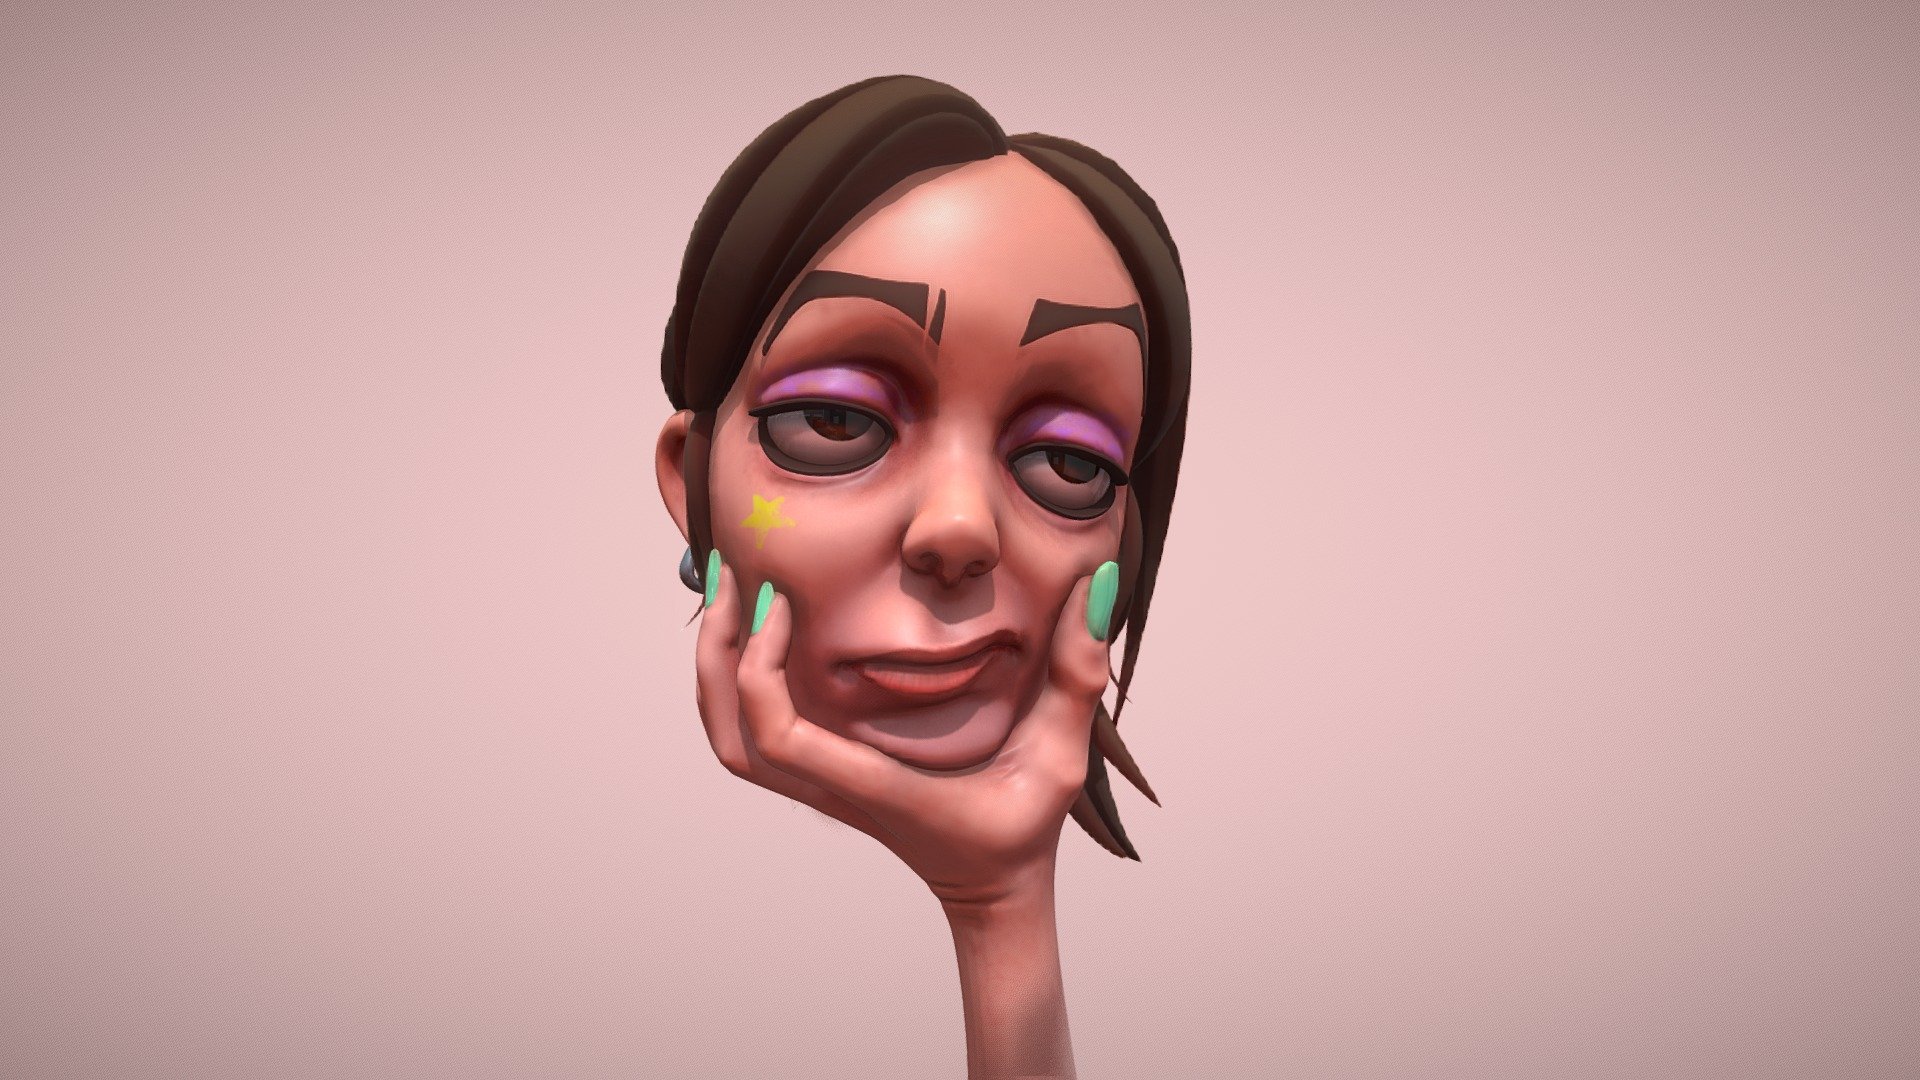 Based on a 2d art whic author I cannot find (and therefore mention here, sorry) 3d model